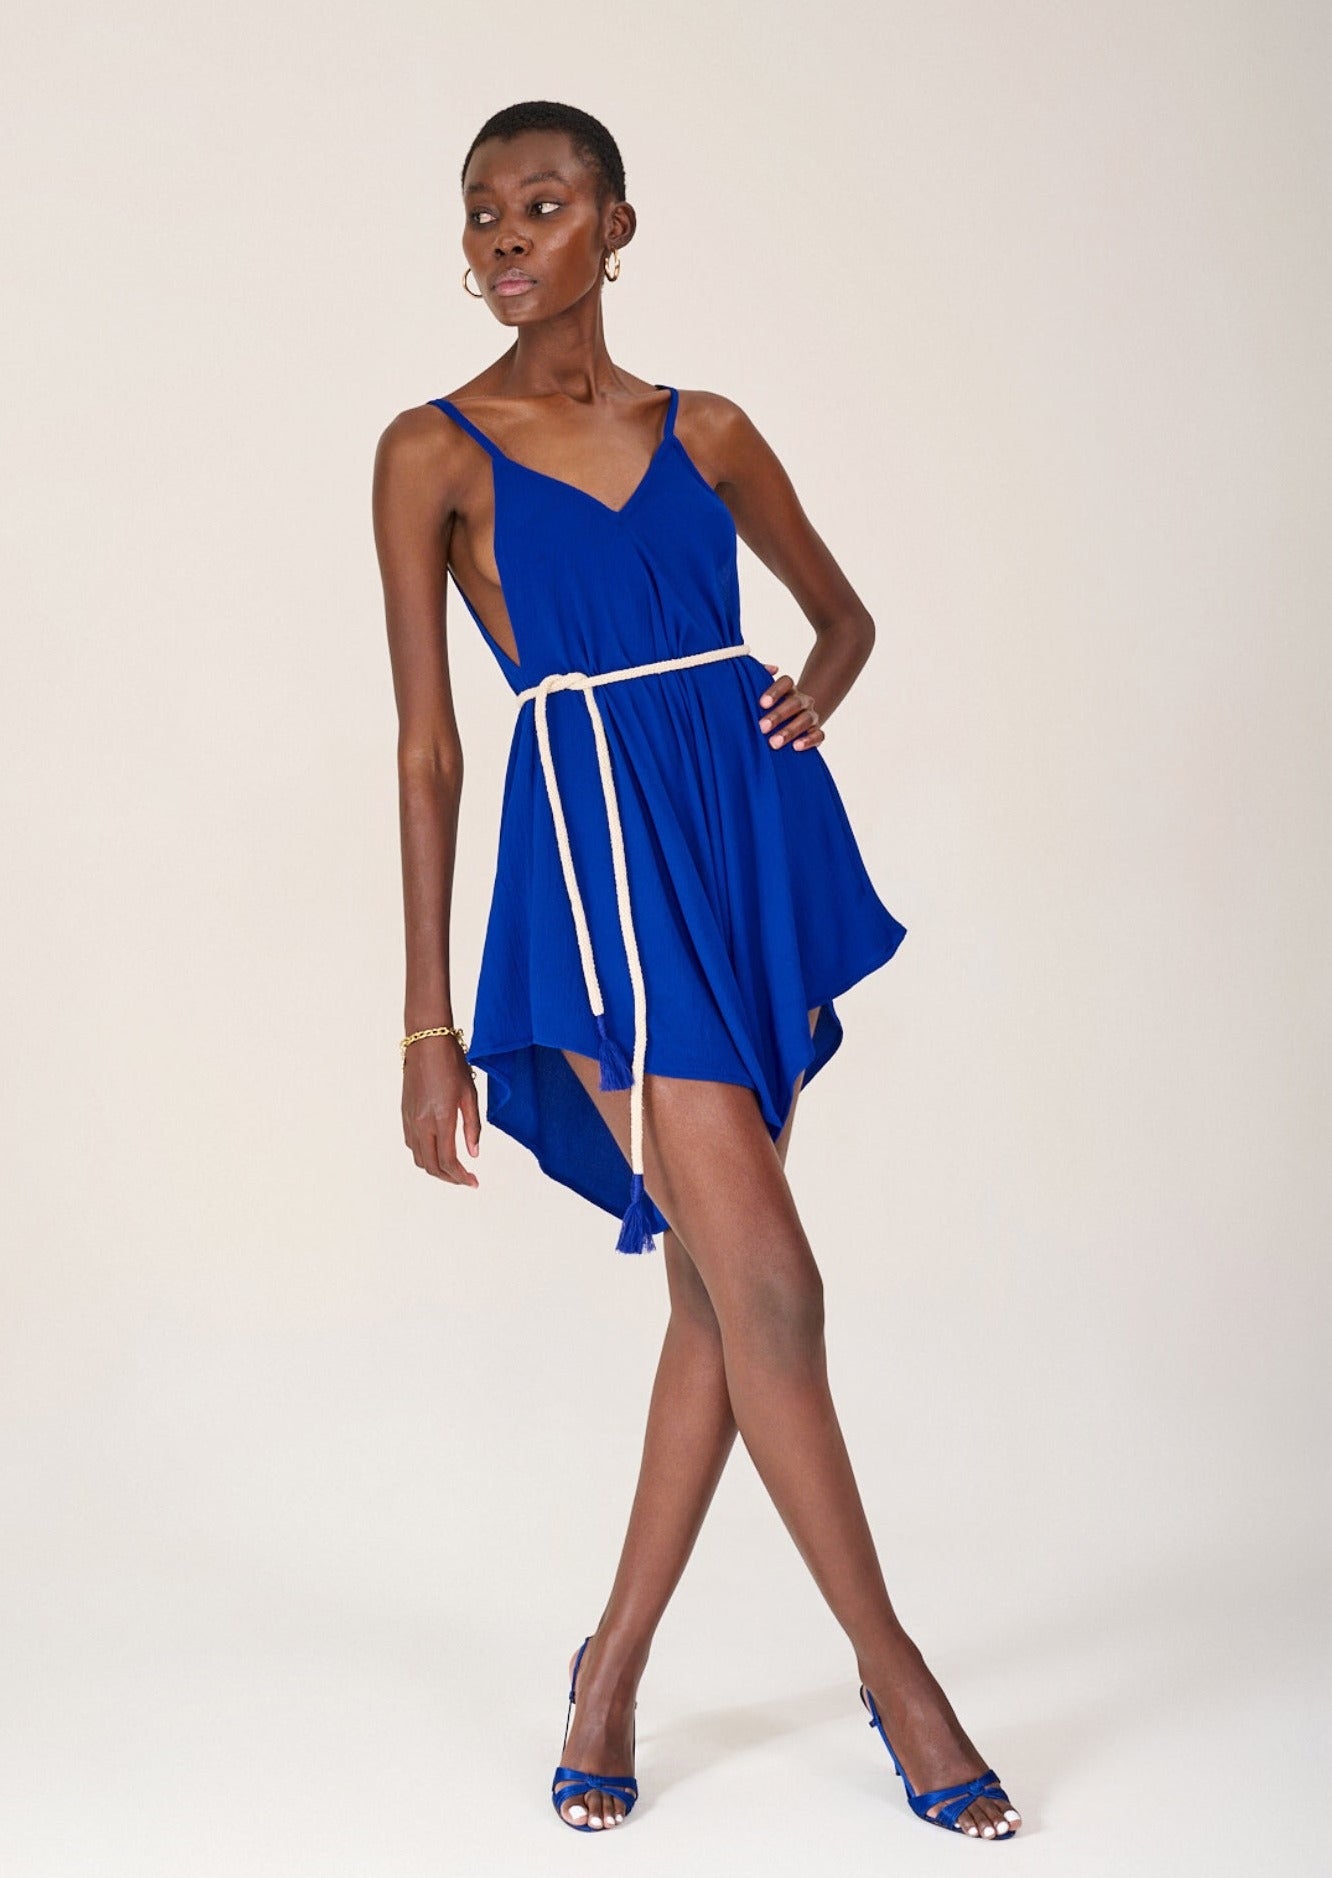 Model posing with hands on hips wearing the KAHINDO Kloofstreet Playsuit